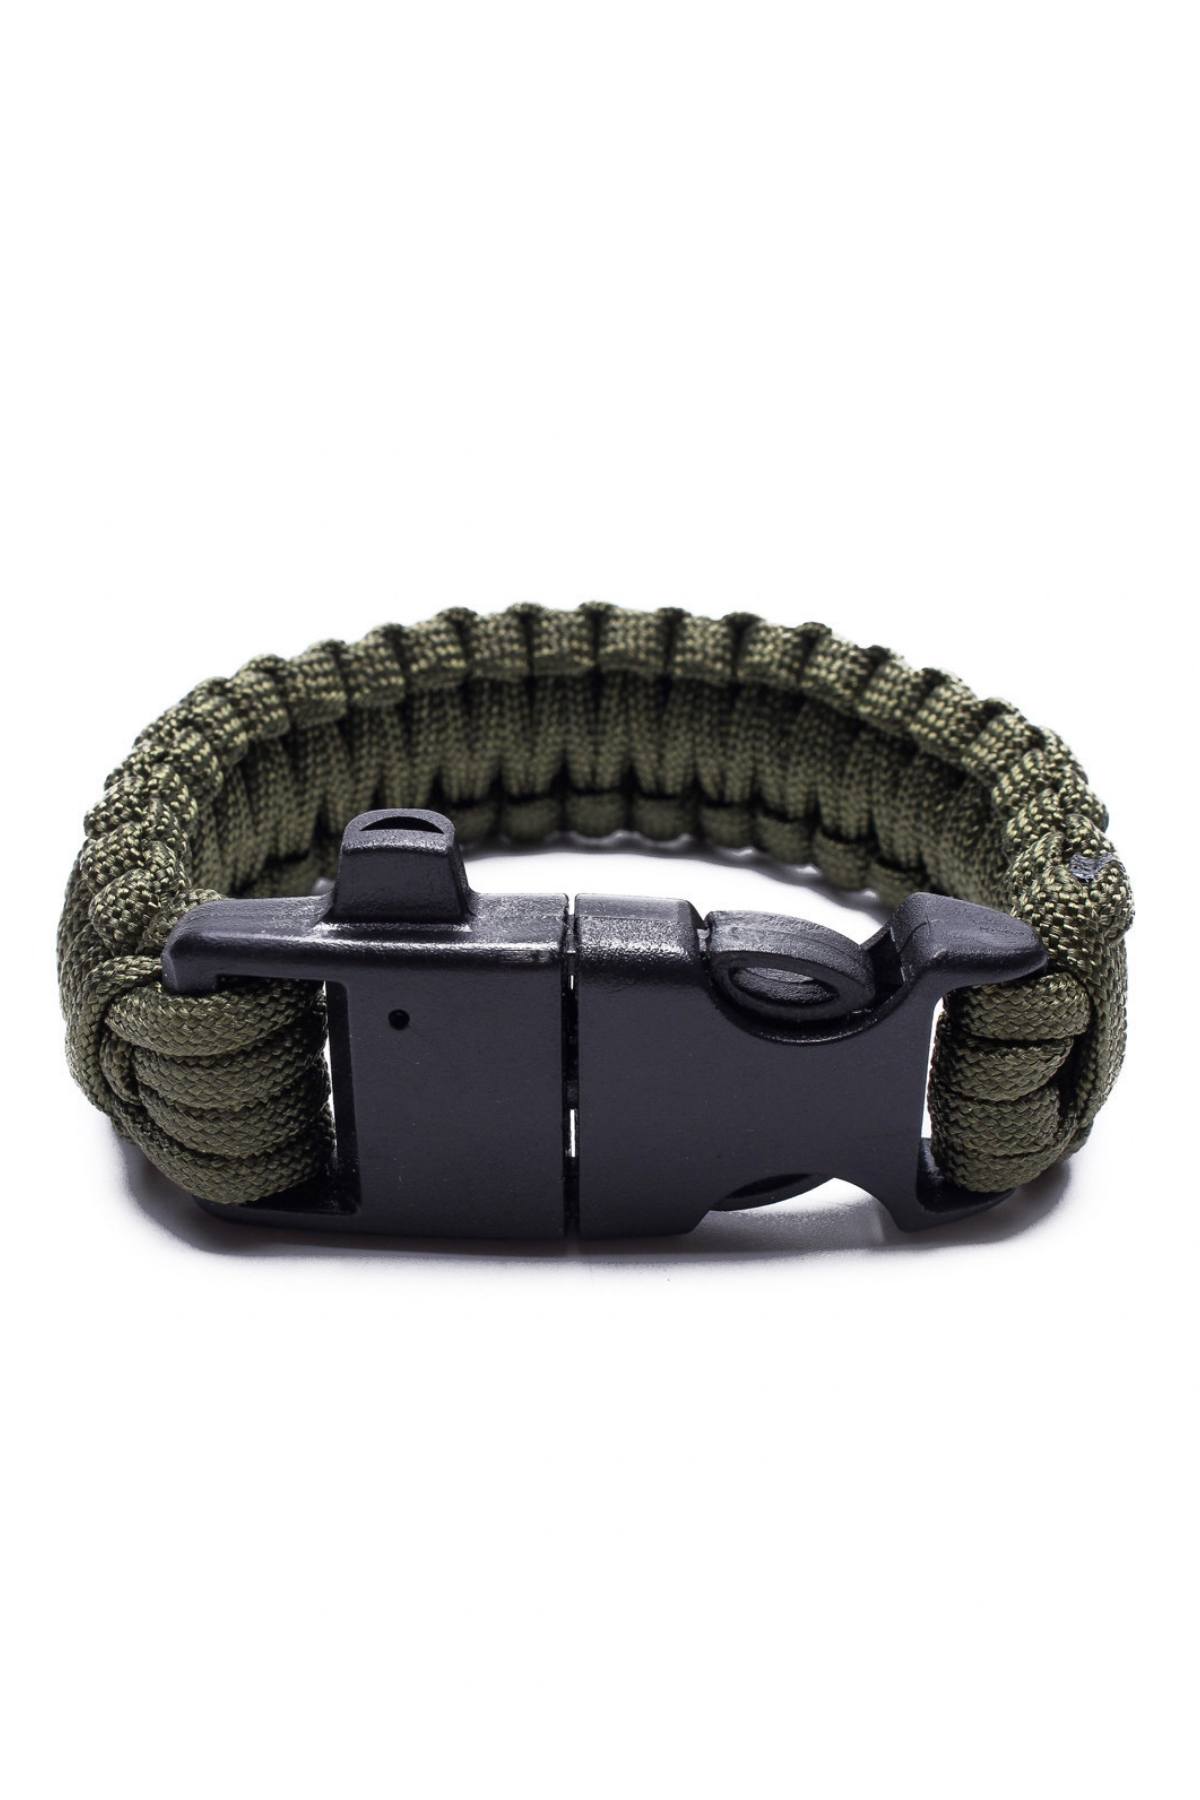 Something Strong Green Paracord Fire-Starting Survival Bracelet